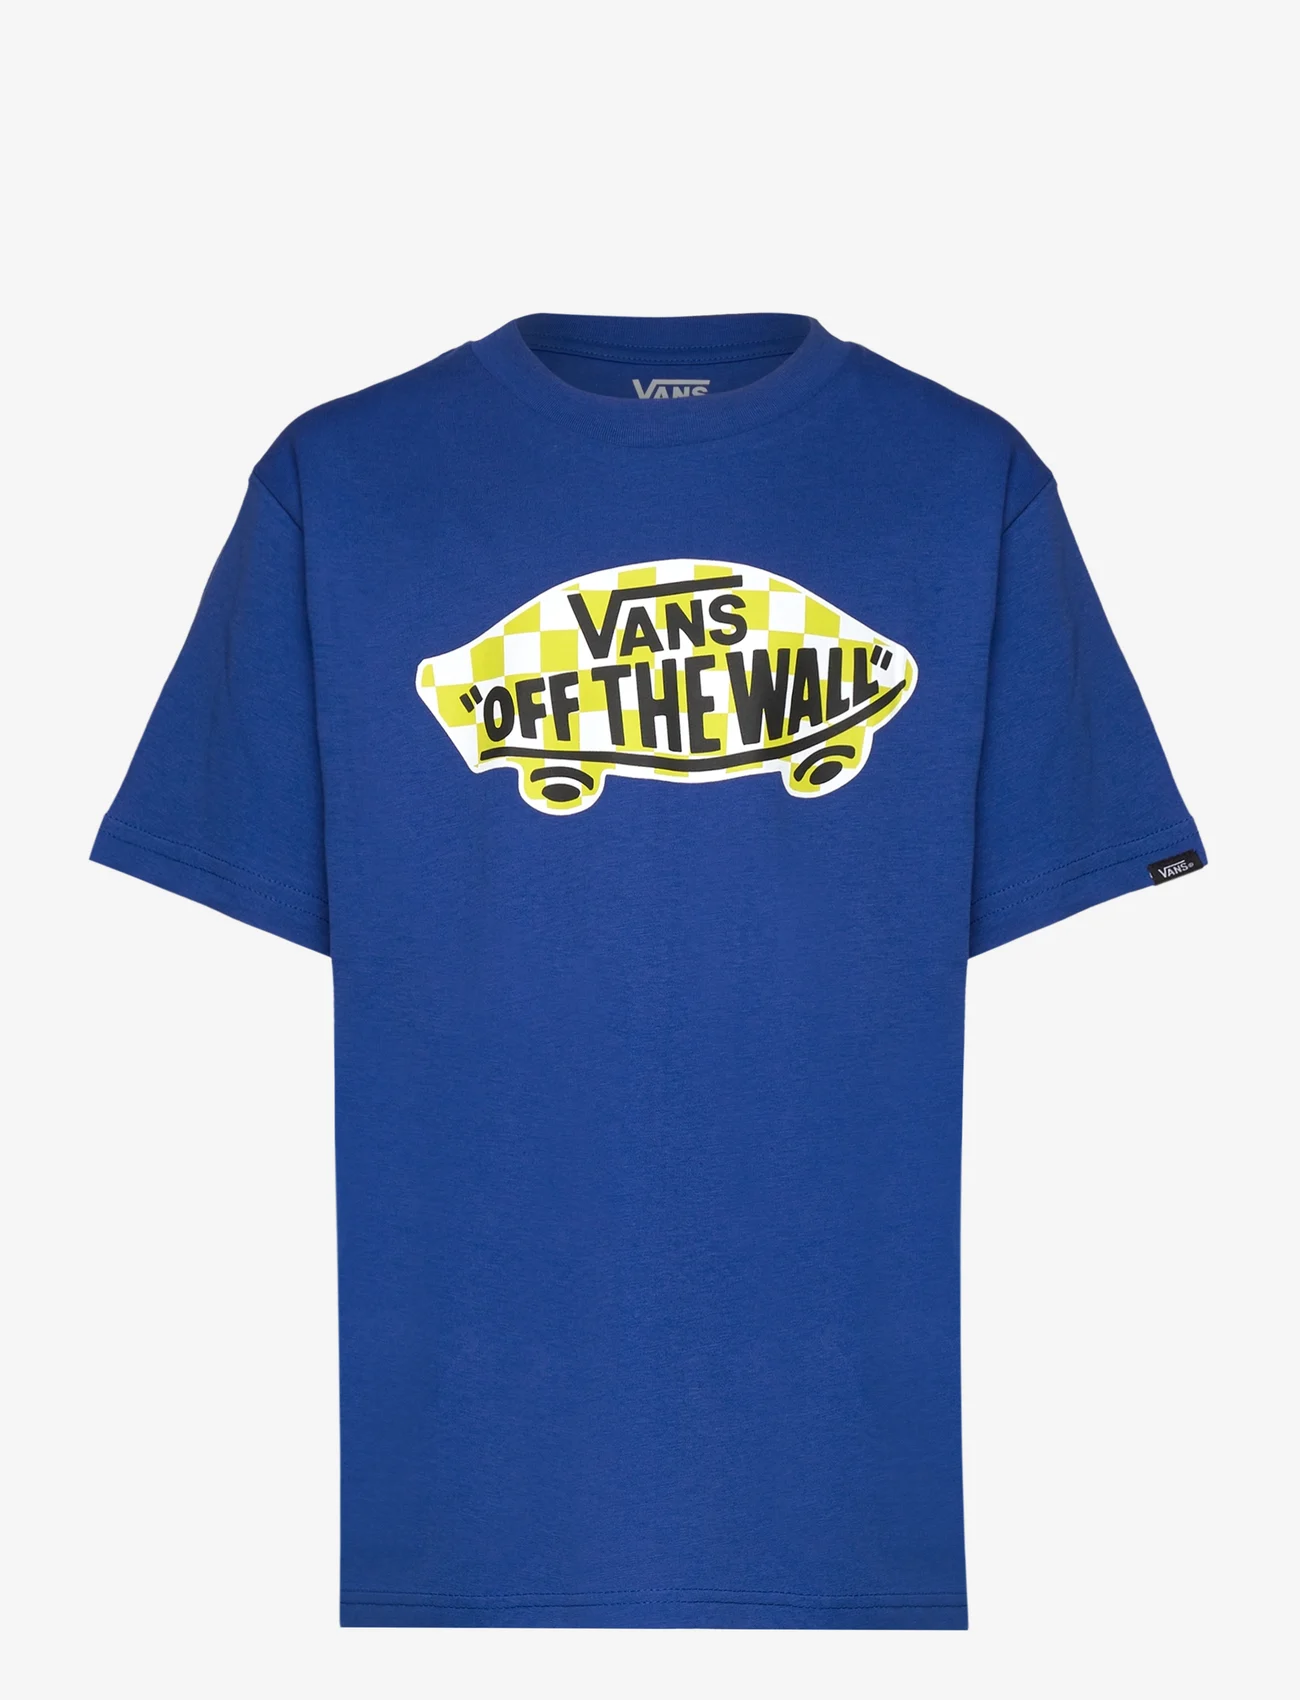 VANS - STYLE 76 FILL BOYS - short-sleeved t-shirts - surf the web - 0